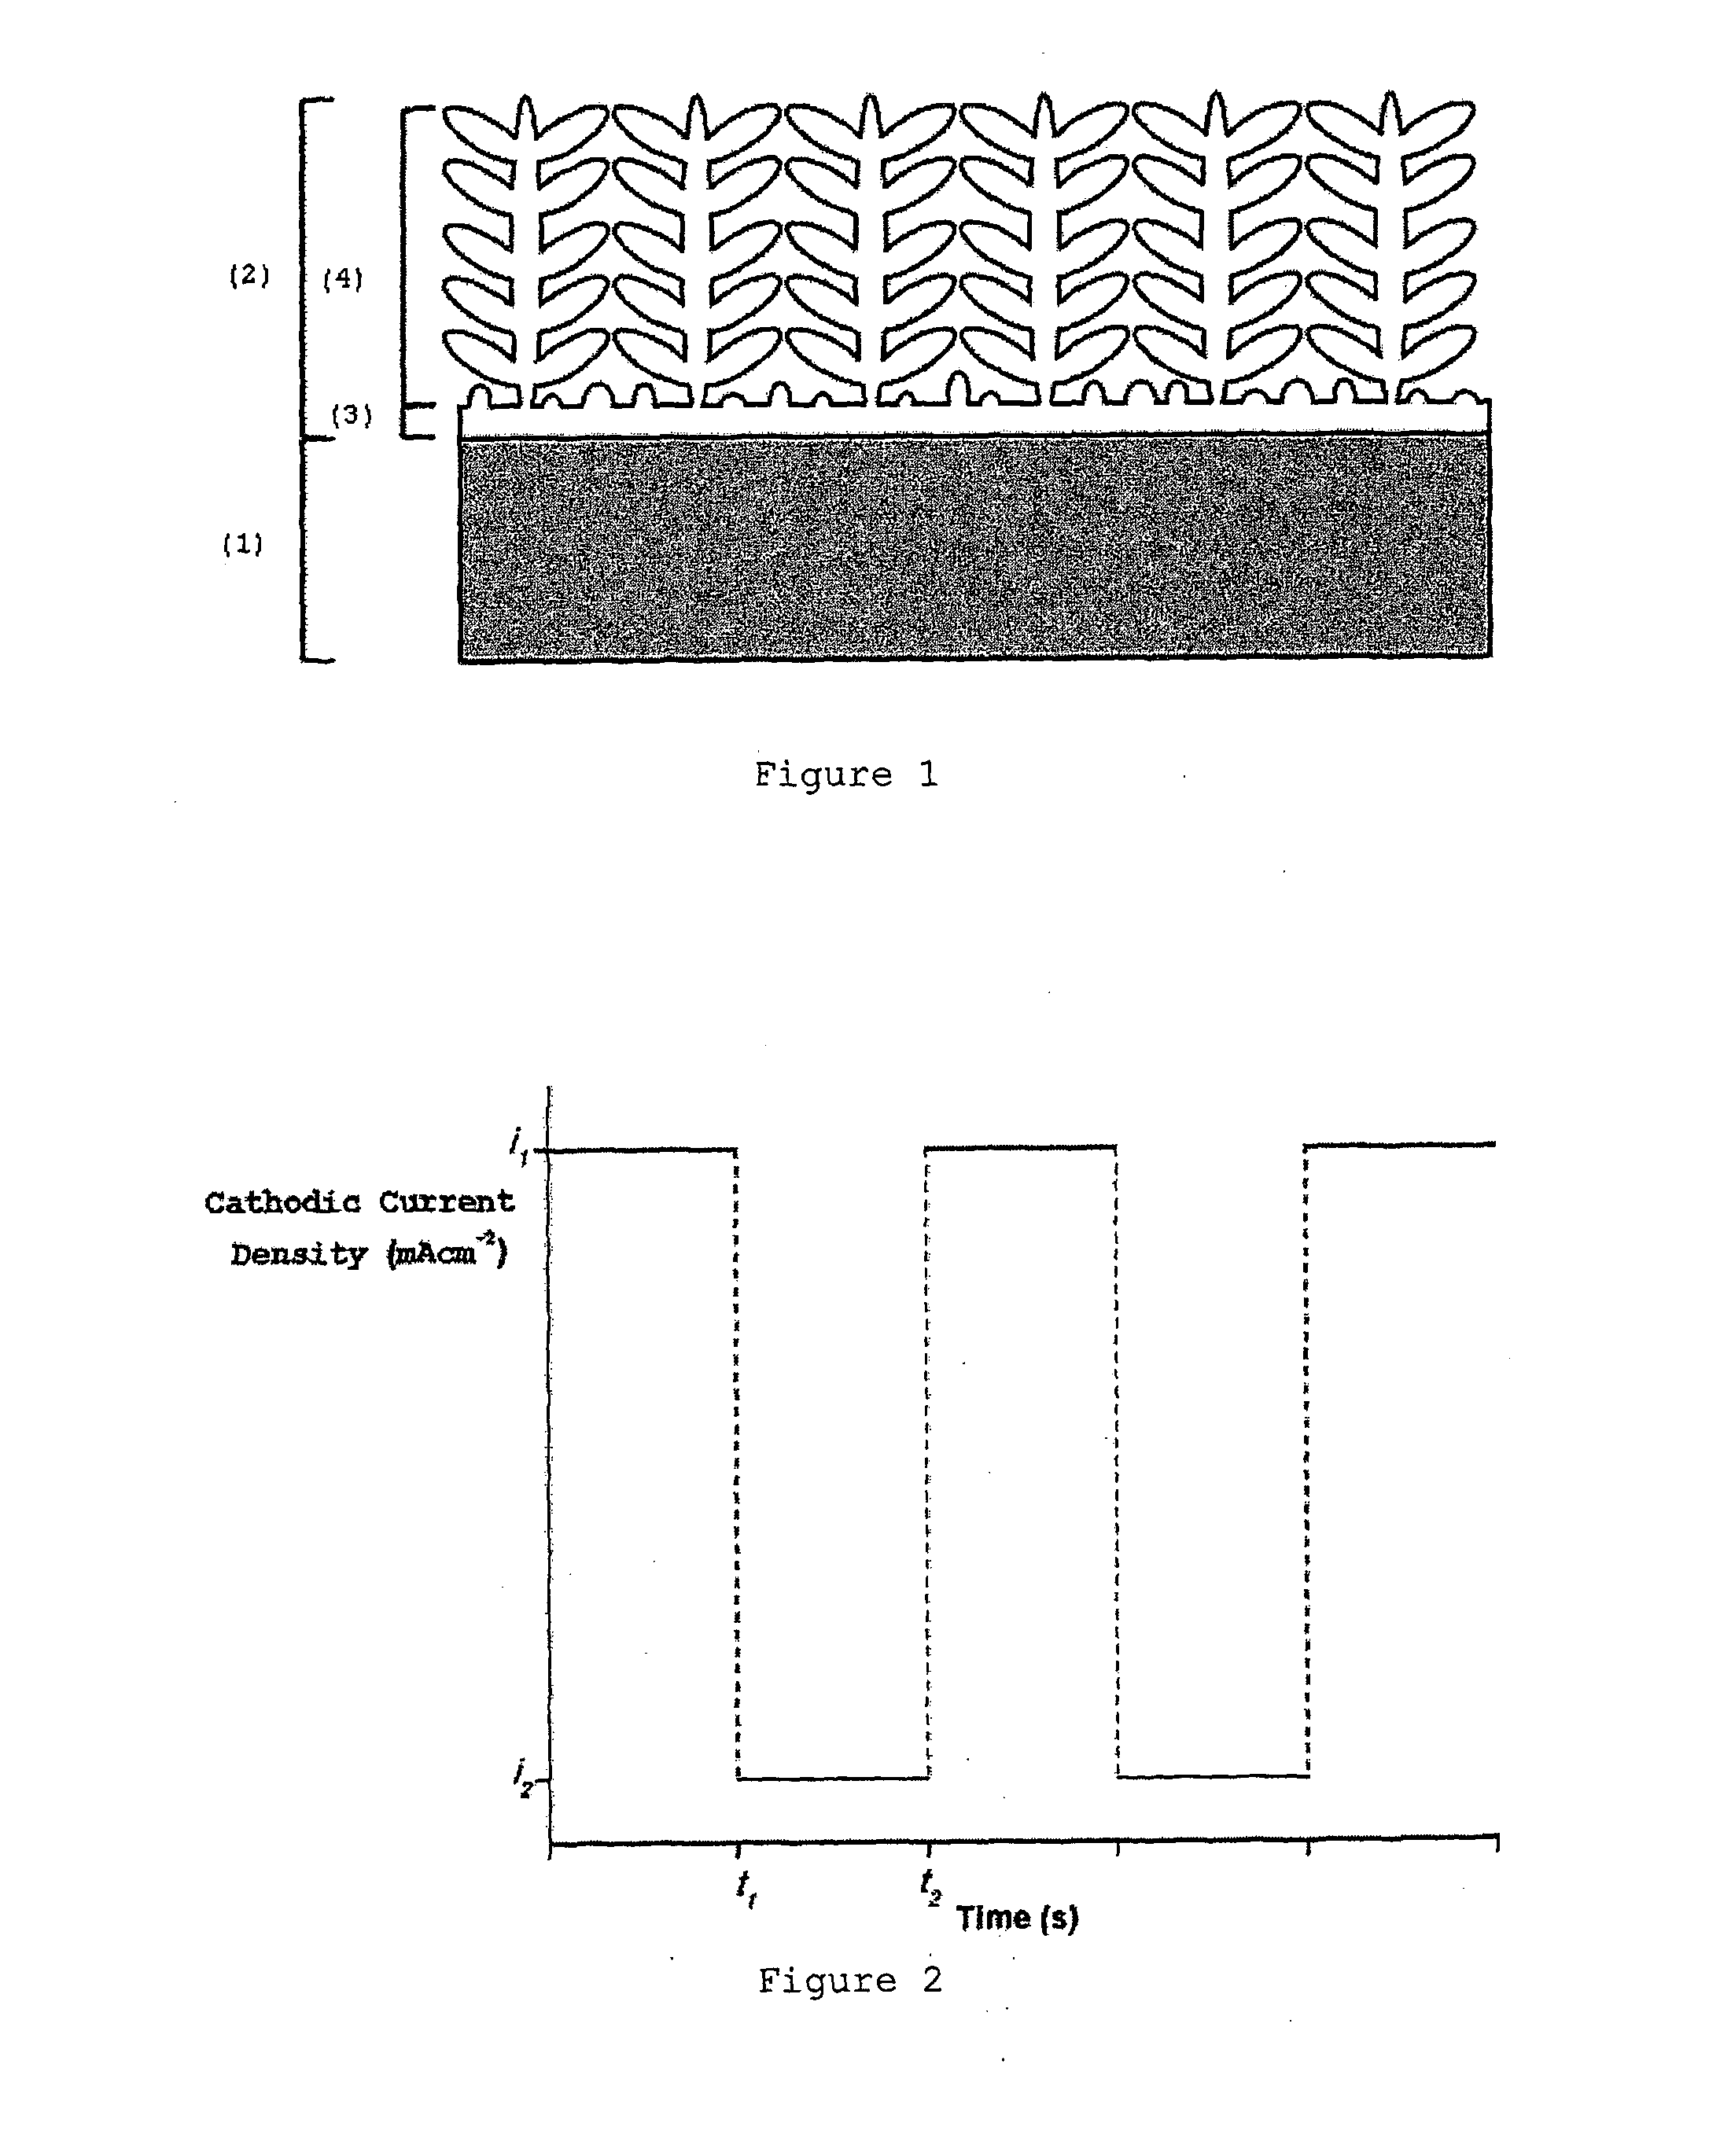 Electrodeposition process of nickel-cobalt coatings with dendritic structure